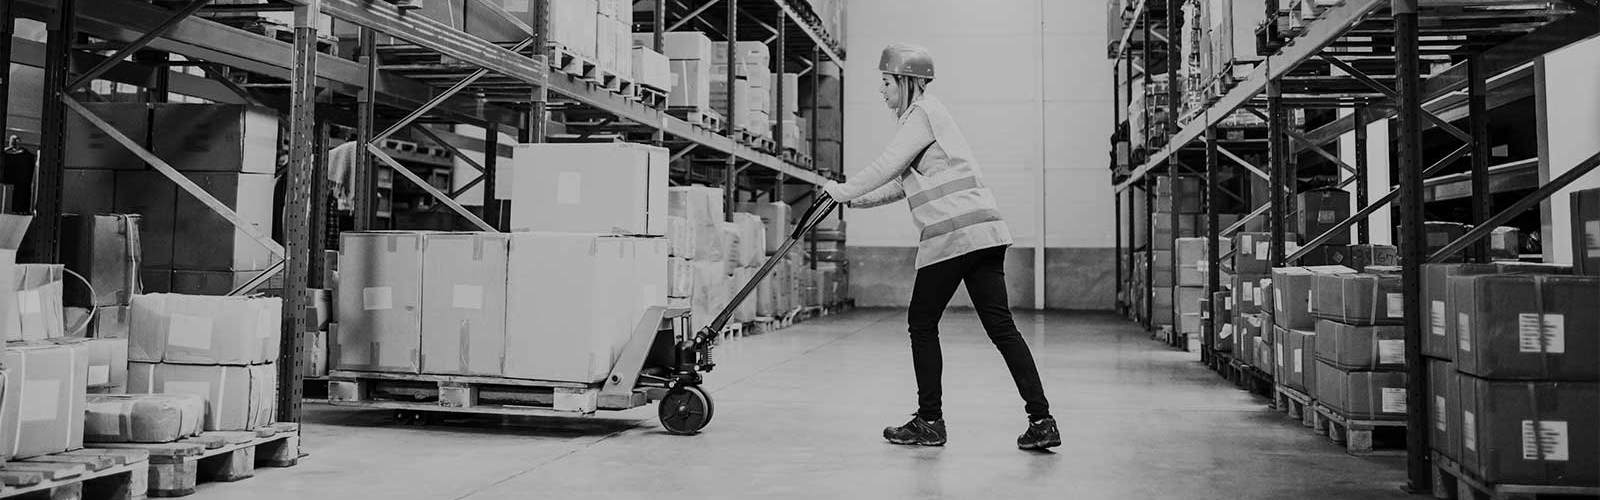 A person pushing a manual pallet truck